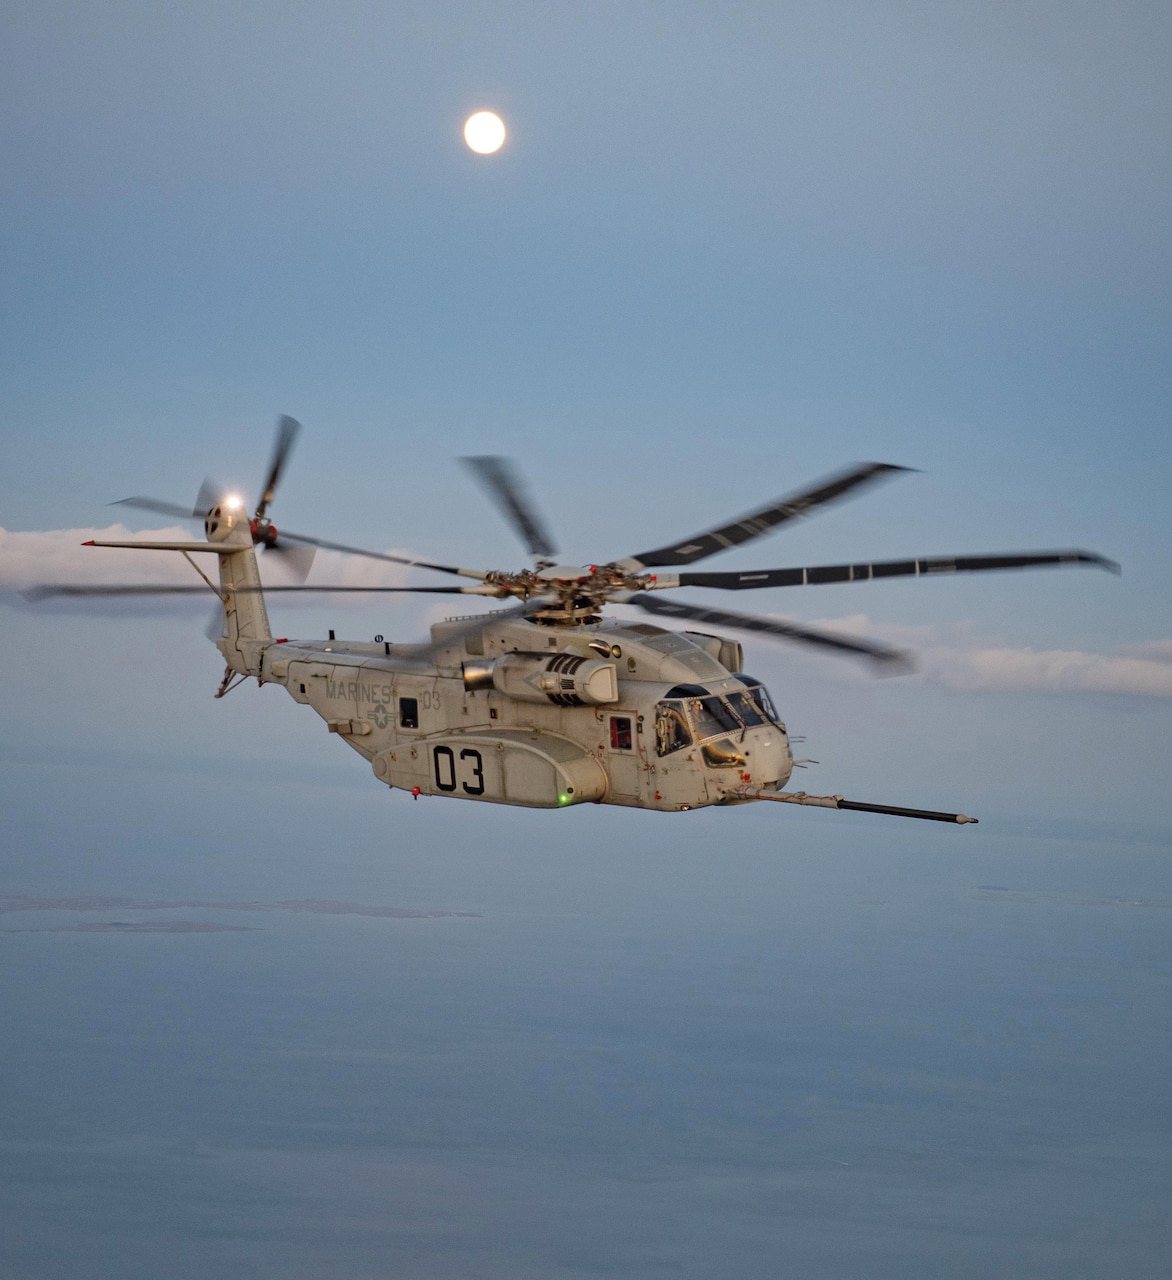 A CH-53K King Stallion aircraft undergoes night aerial refueling tests over the Chesapeake Bay in June, 2021.